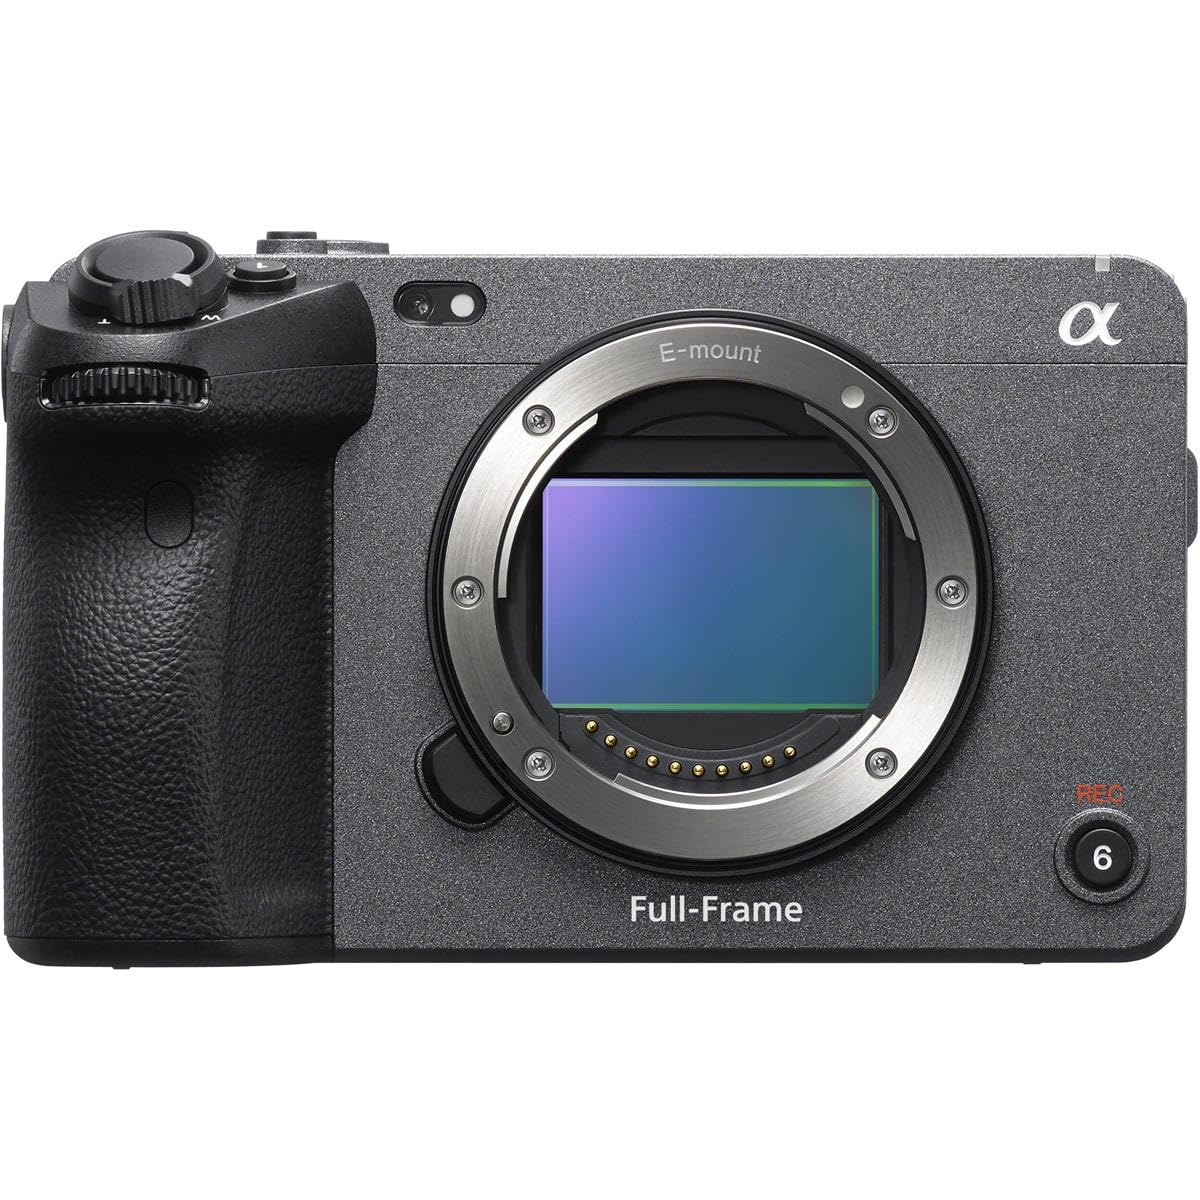 Sony FX3 Full-Frame Cinema Line Camera with 24-70mm Lens, Bundle with 128GB V90 SD Memory Card, Shoulder Bag, Extra Battery, Charger, 82mm Filter Kit, Screen Protector, Cleaning Kit